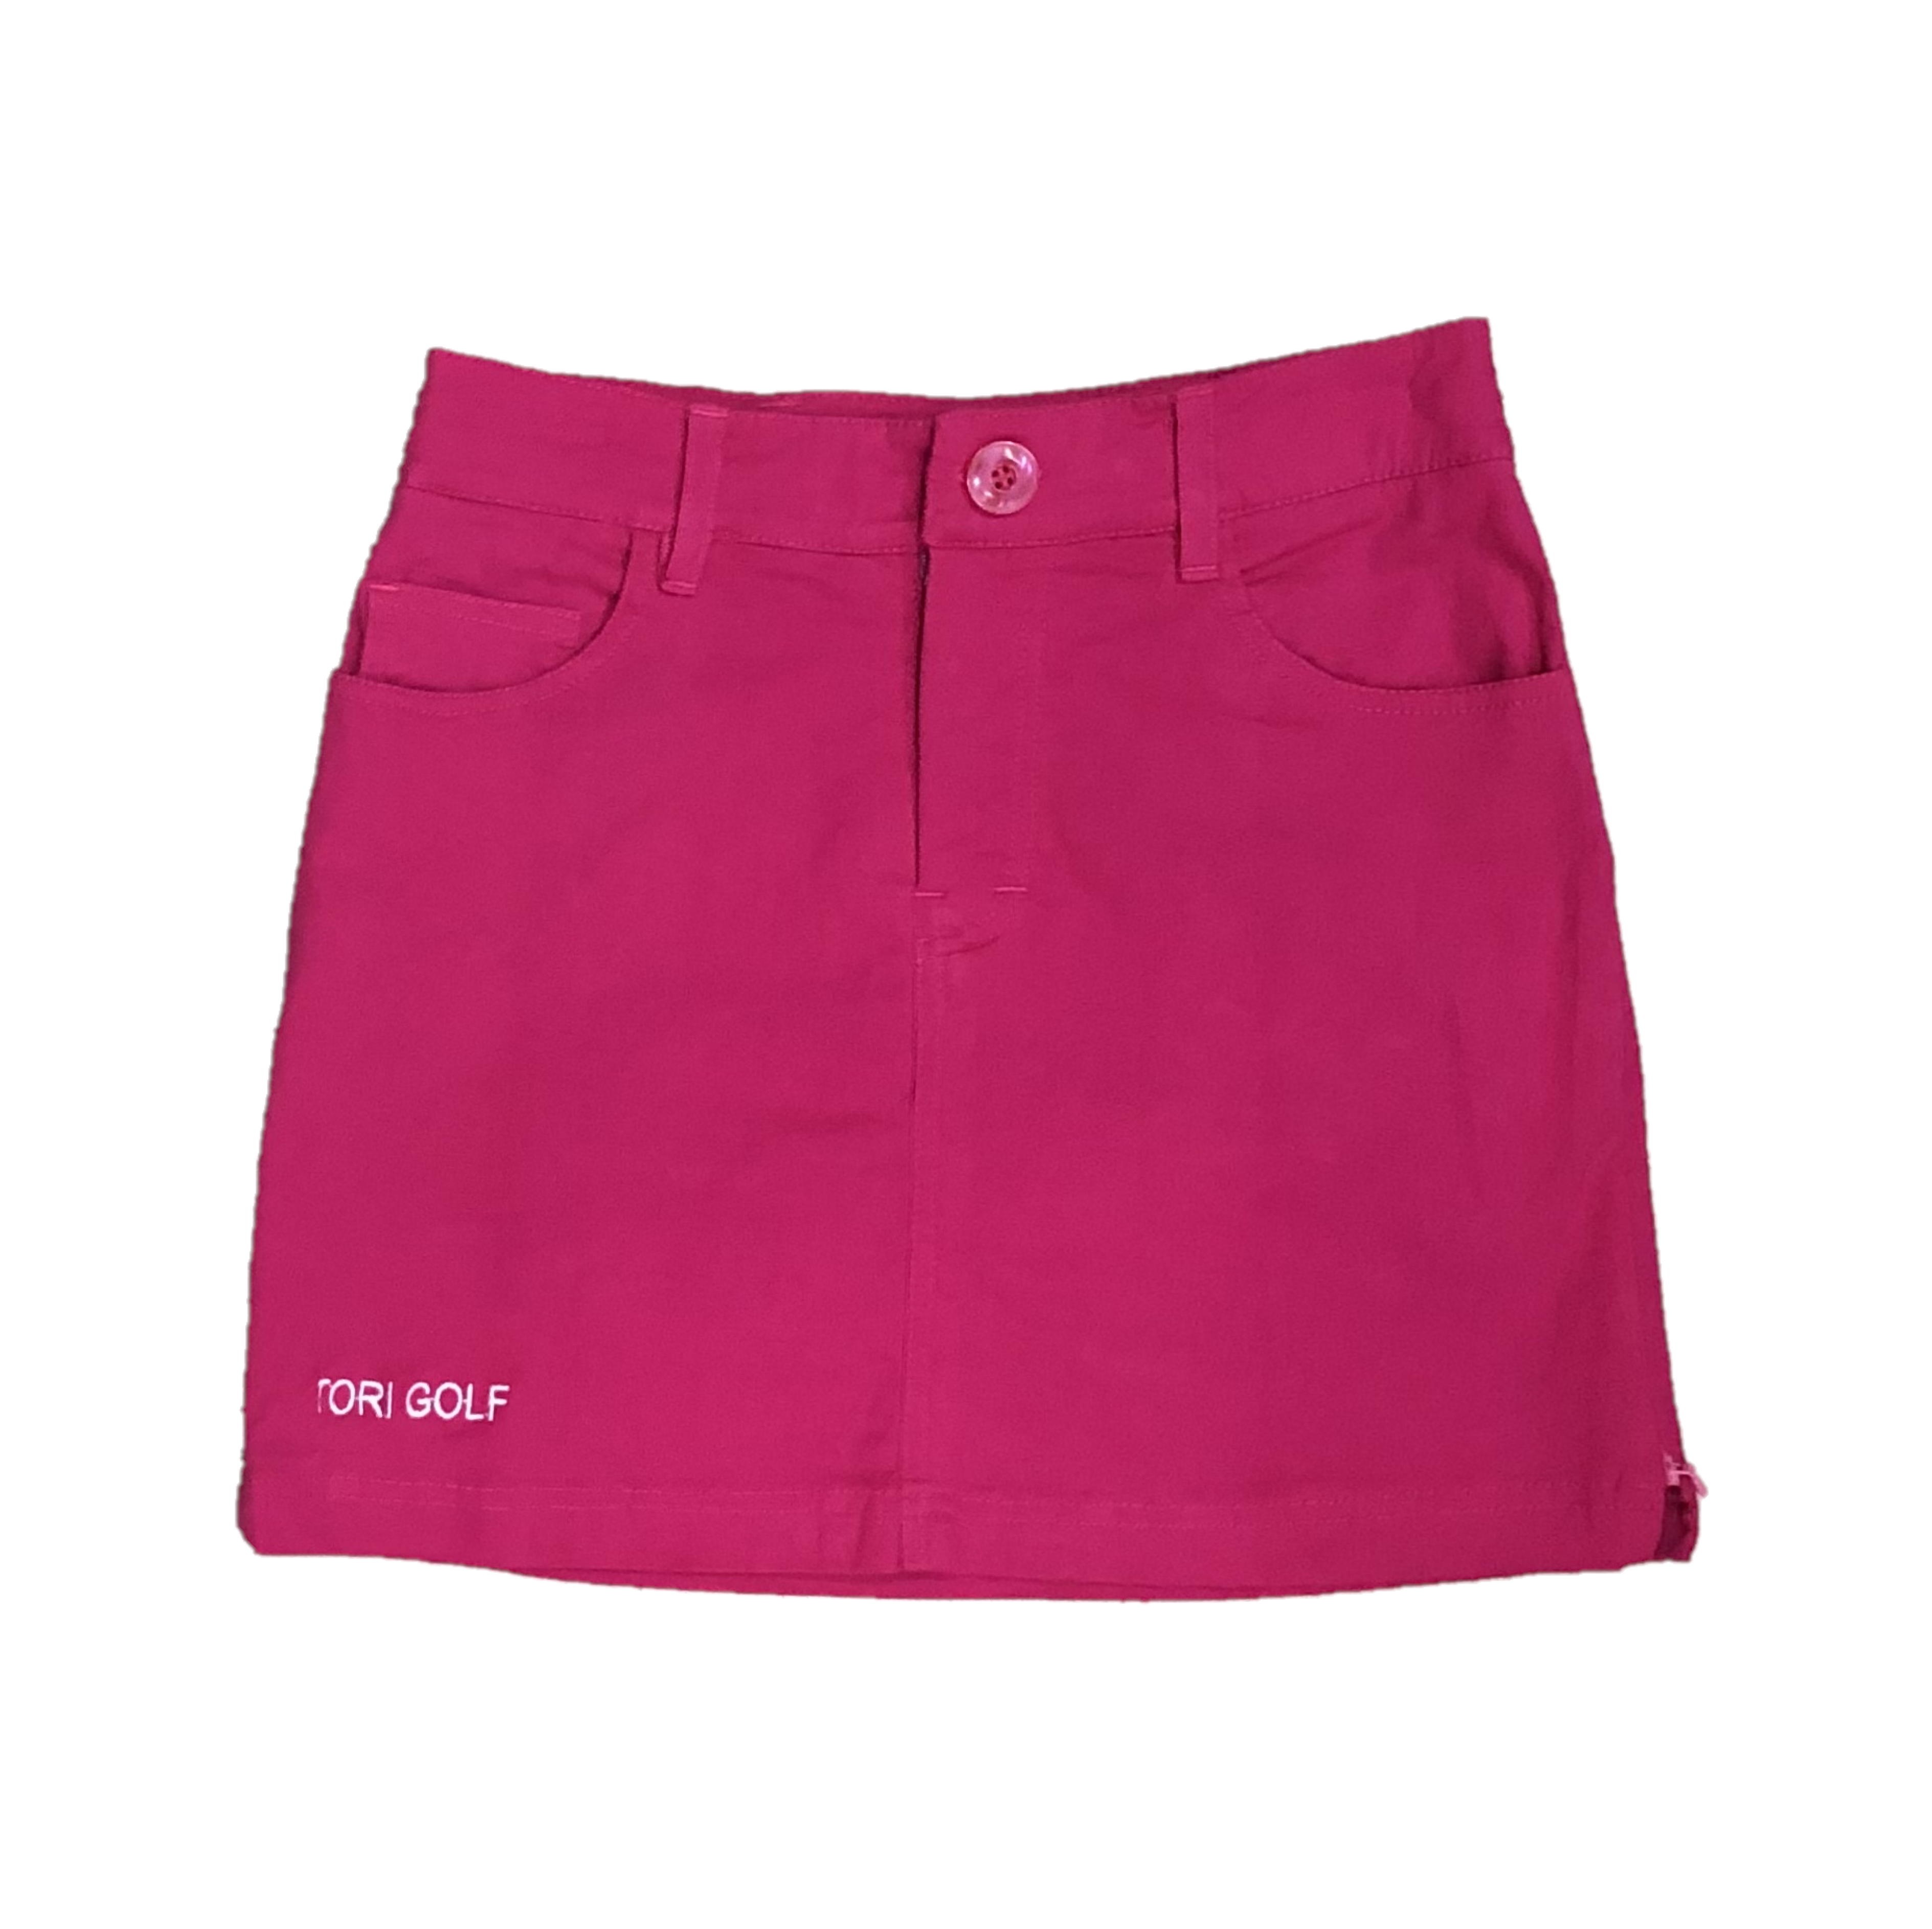 LS-021K || Skirt Dark Pink with 2 Round Front Pockets,2 Rear Patch Pockets Front Zipper and 2 Zipped Side Vents